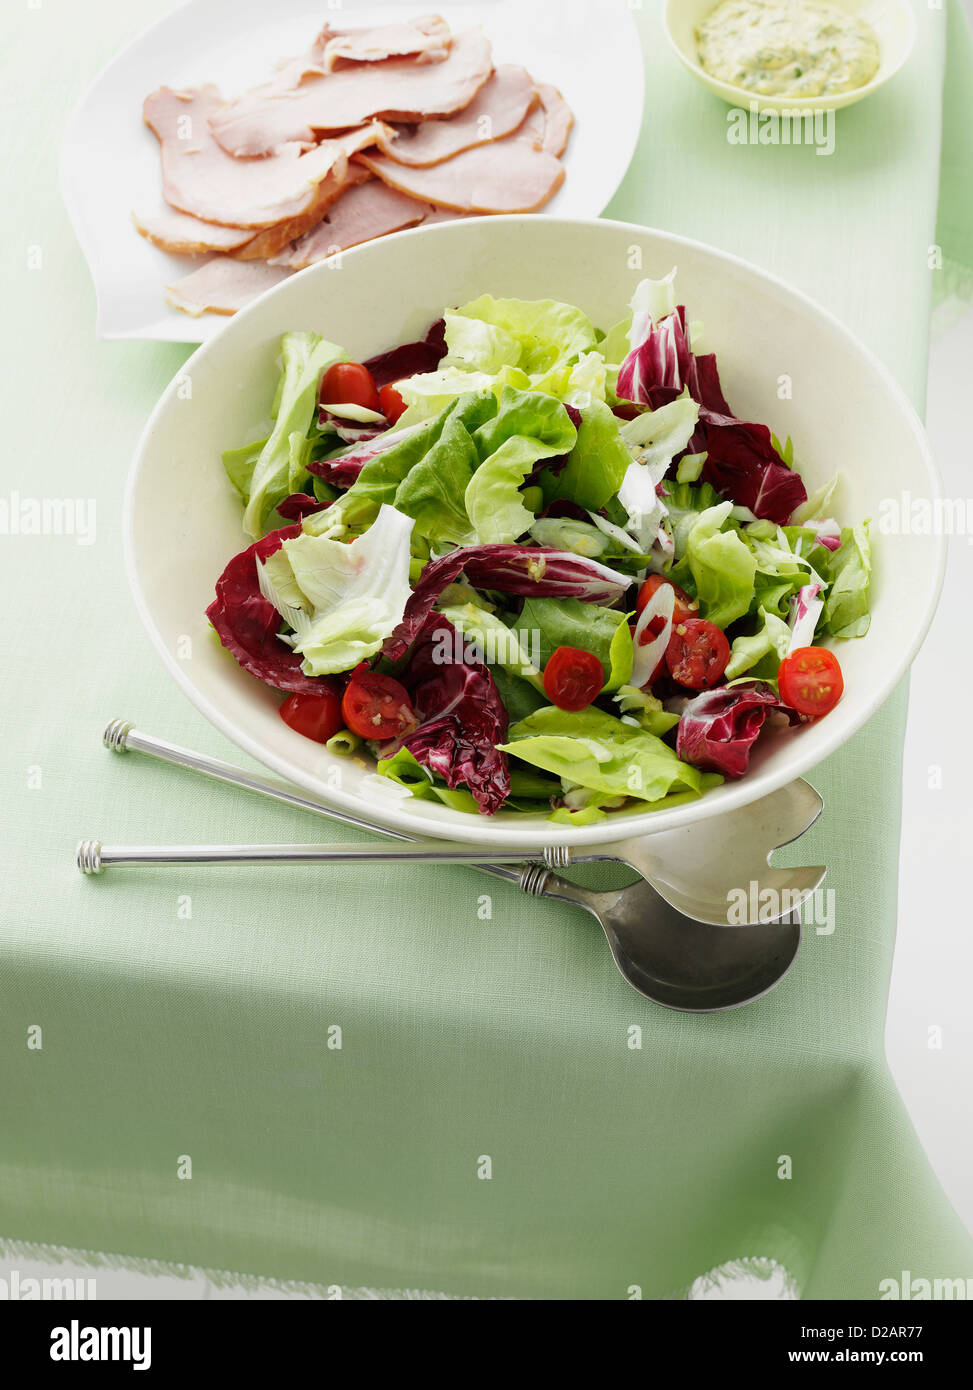 Salad bowl with slices of ham Stock Photo